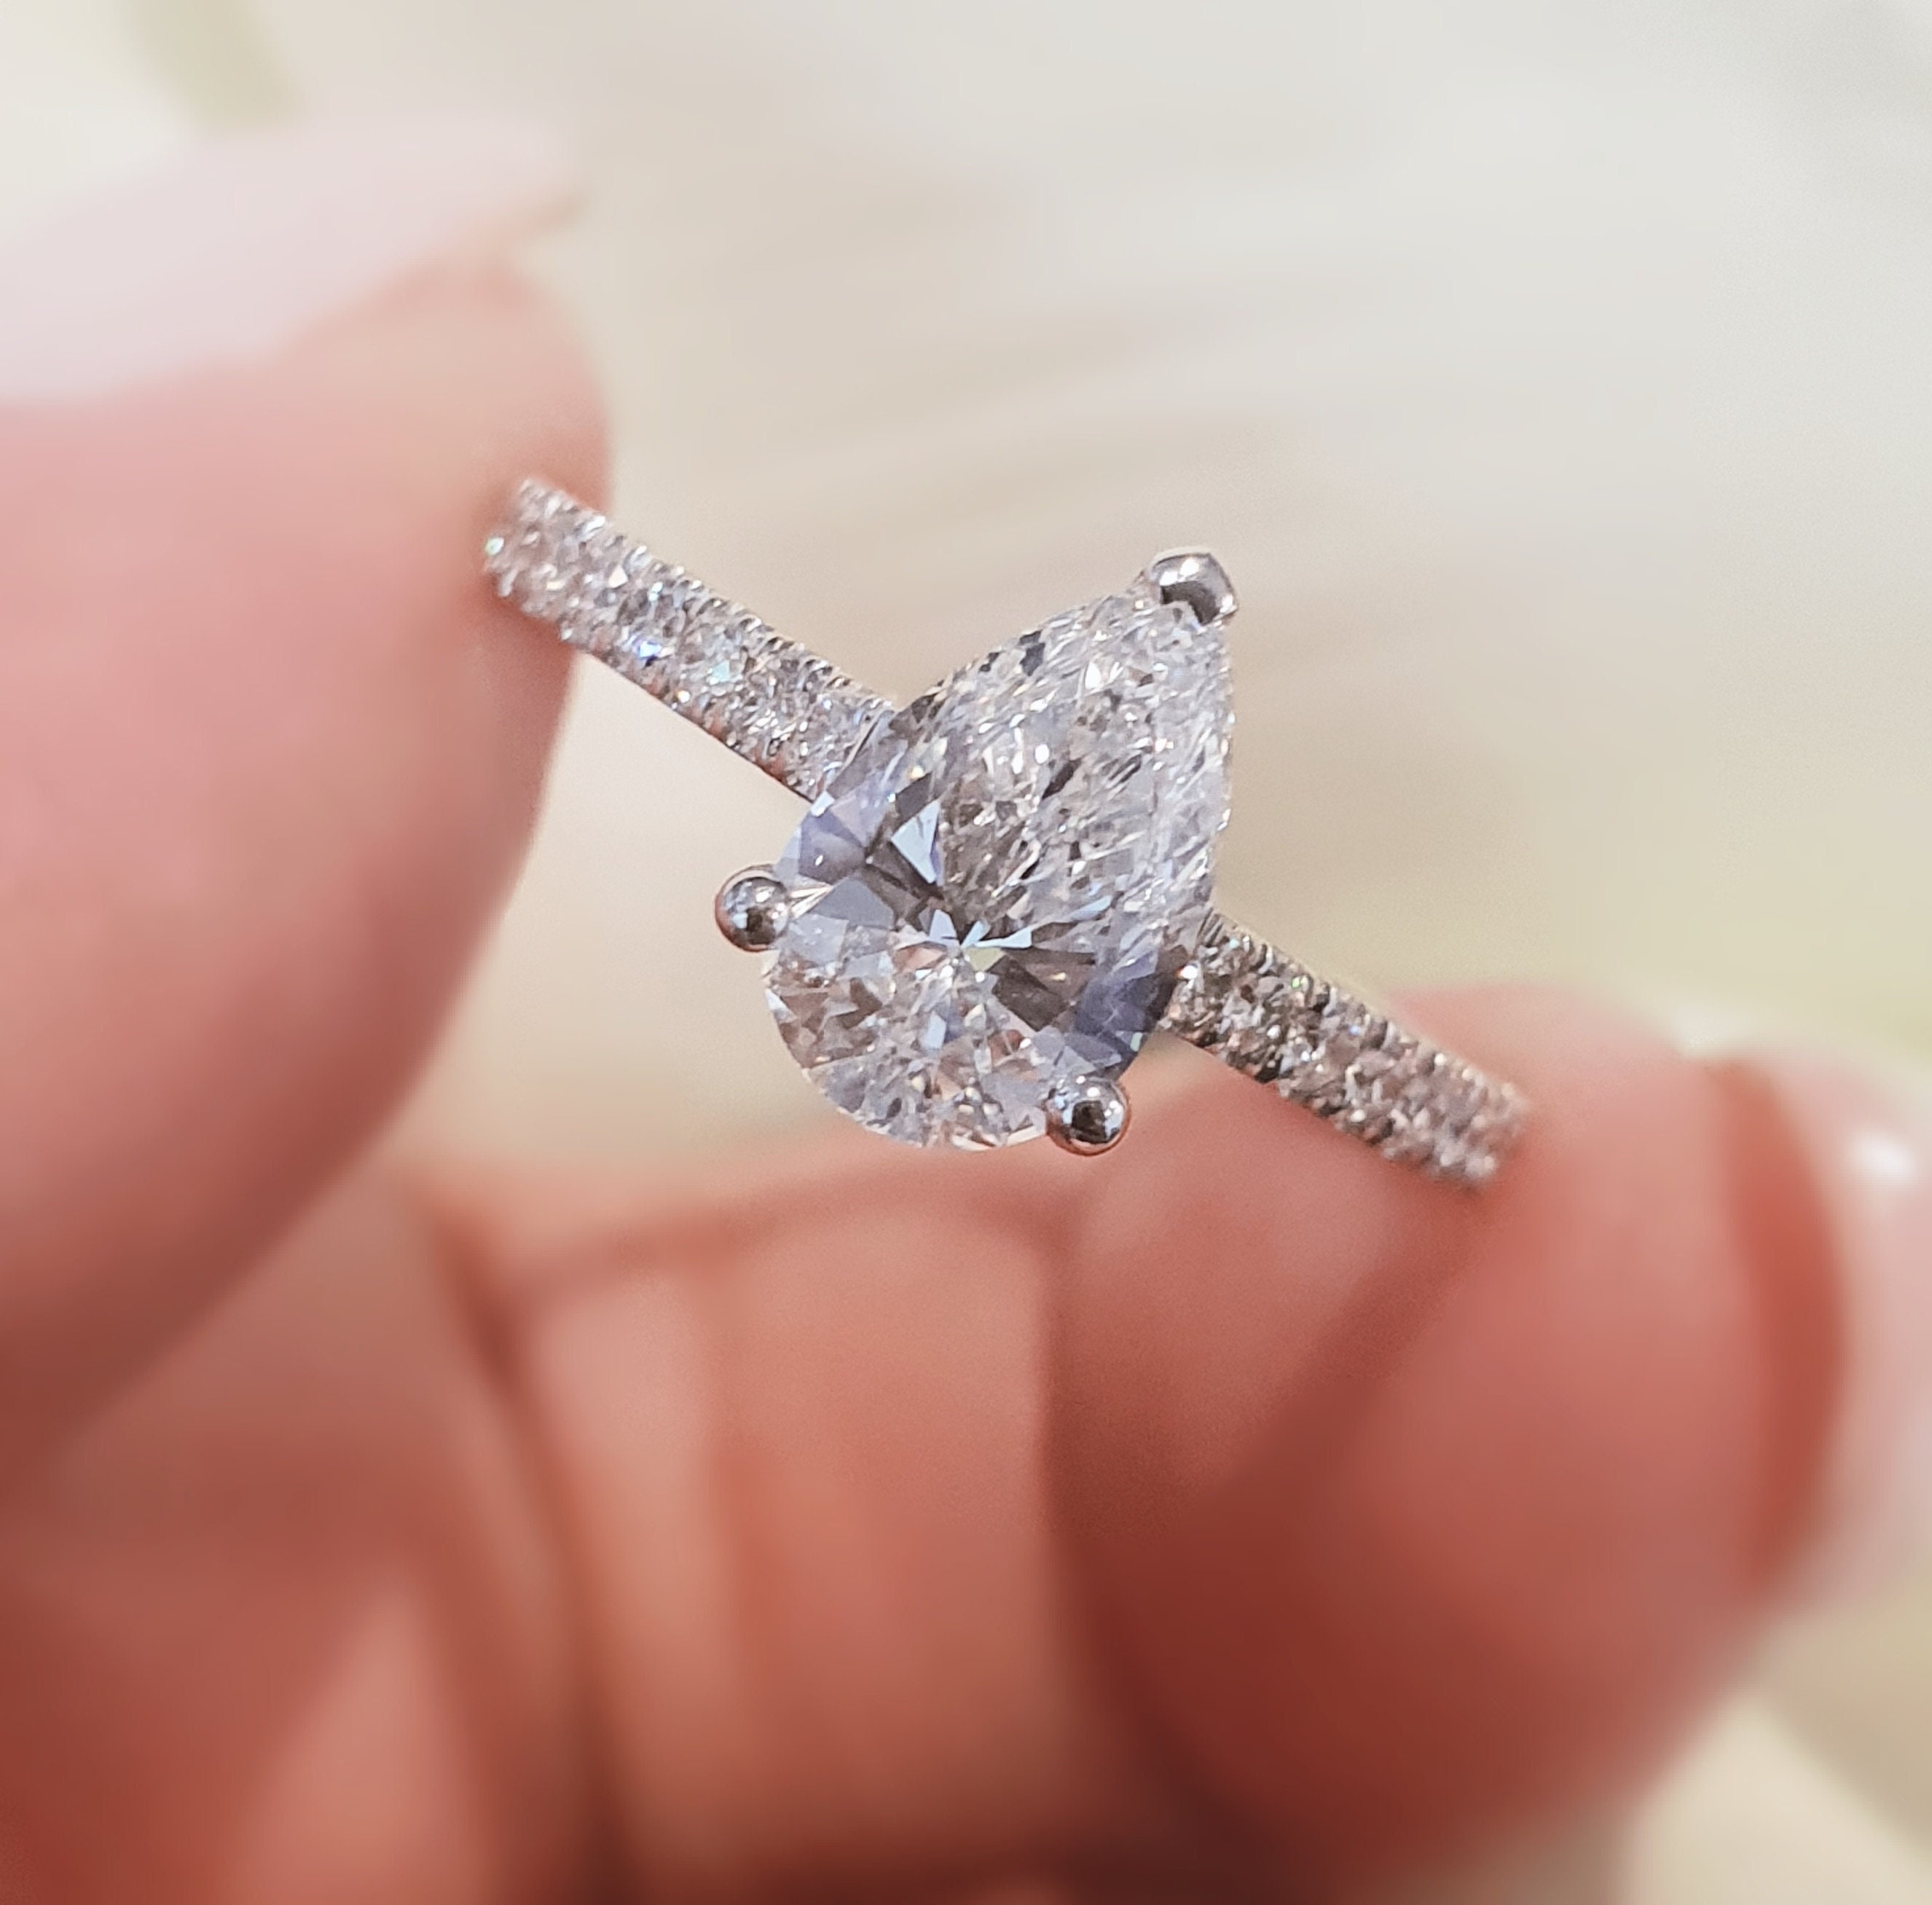 Pear Shaped Engagement Ring, Pear Cut Side Diamond Ring, Pear Halo Ring, 3.5 ct Diamond Ring, High Quality Diamond Ring